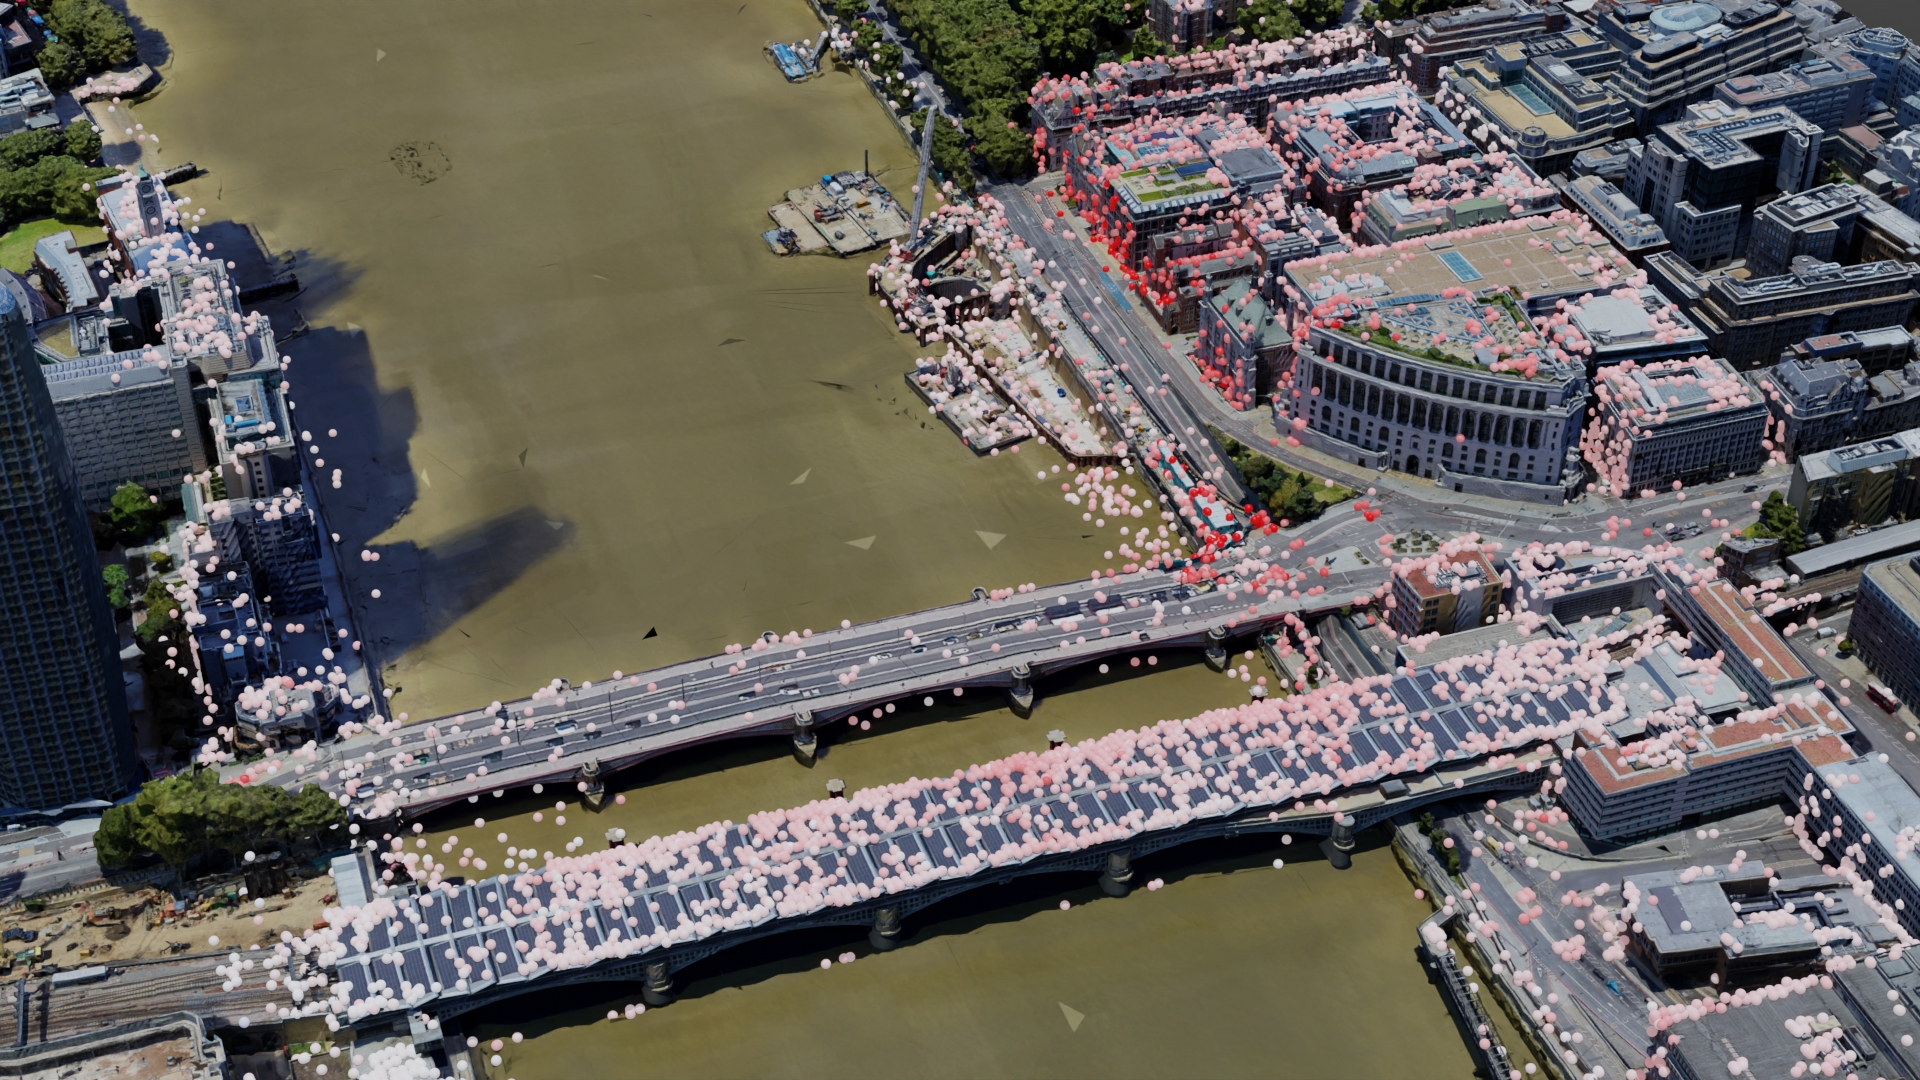 London's Blackfriar's bridge with high-resolution InSAR data points plotted on it